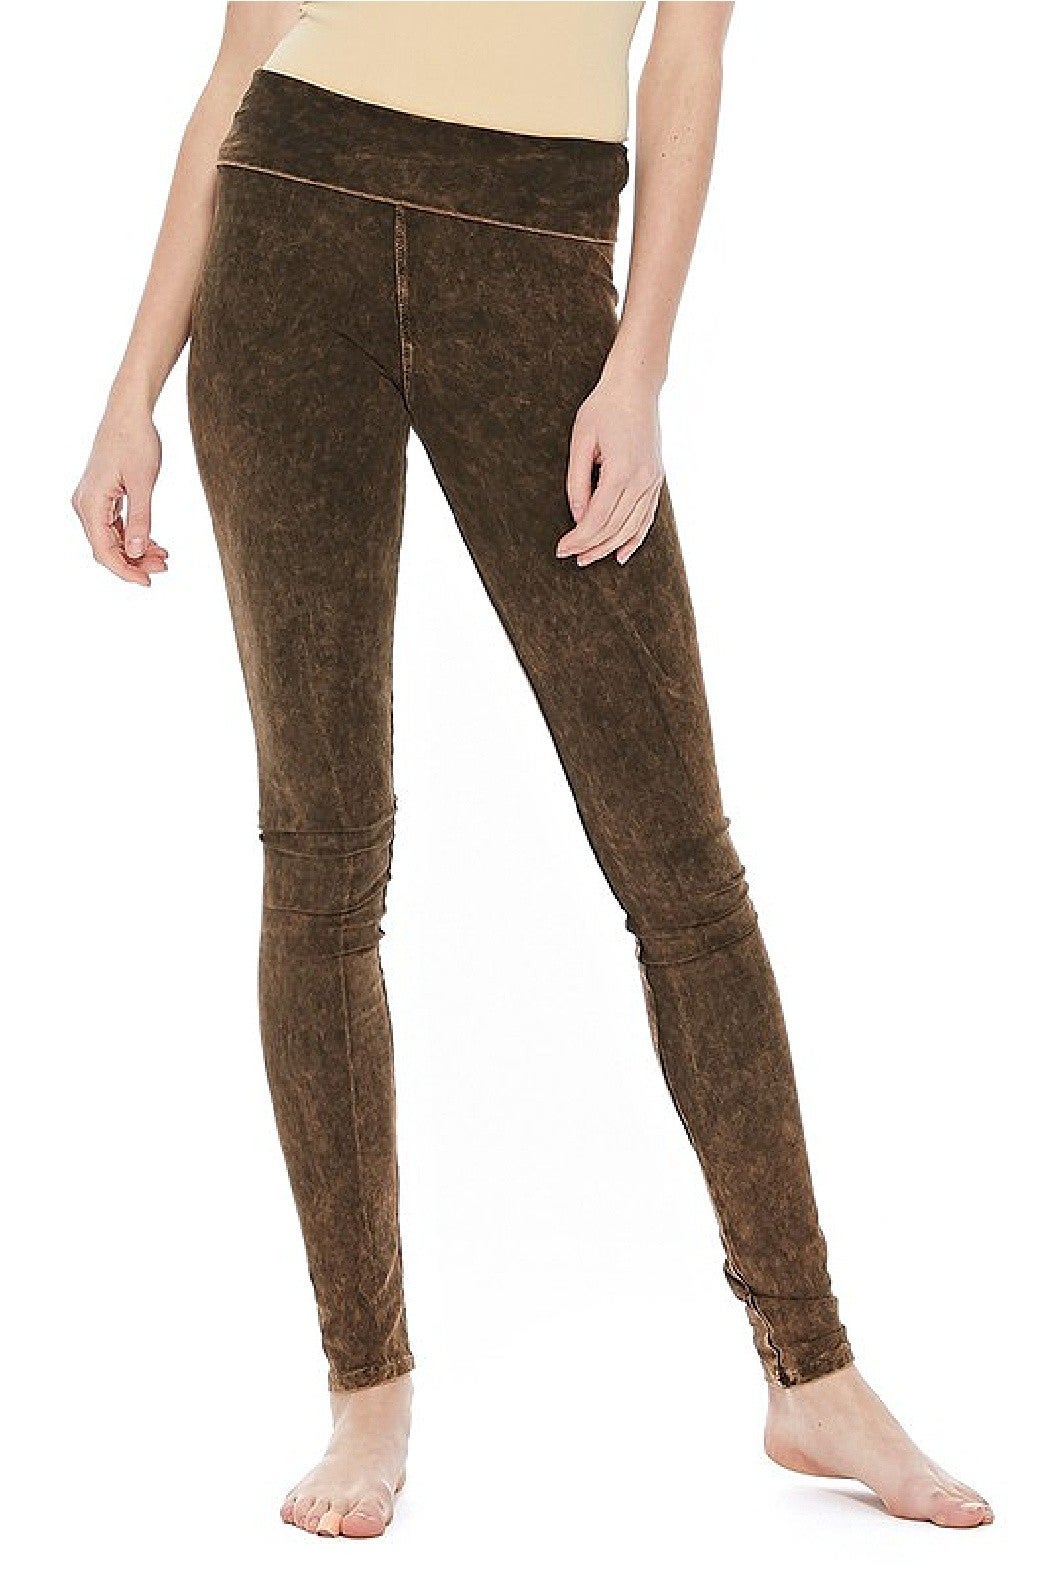 Mineral Washed Fold-Over Waist Leggings - Brown